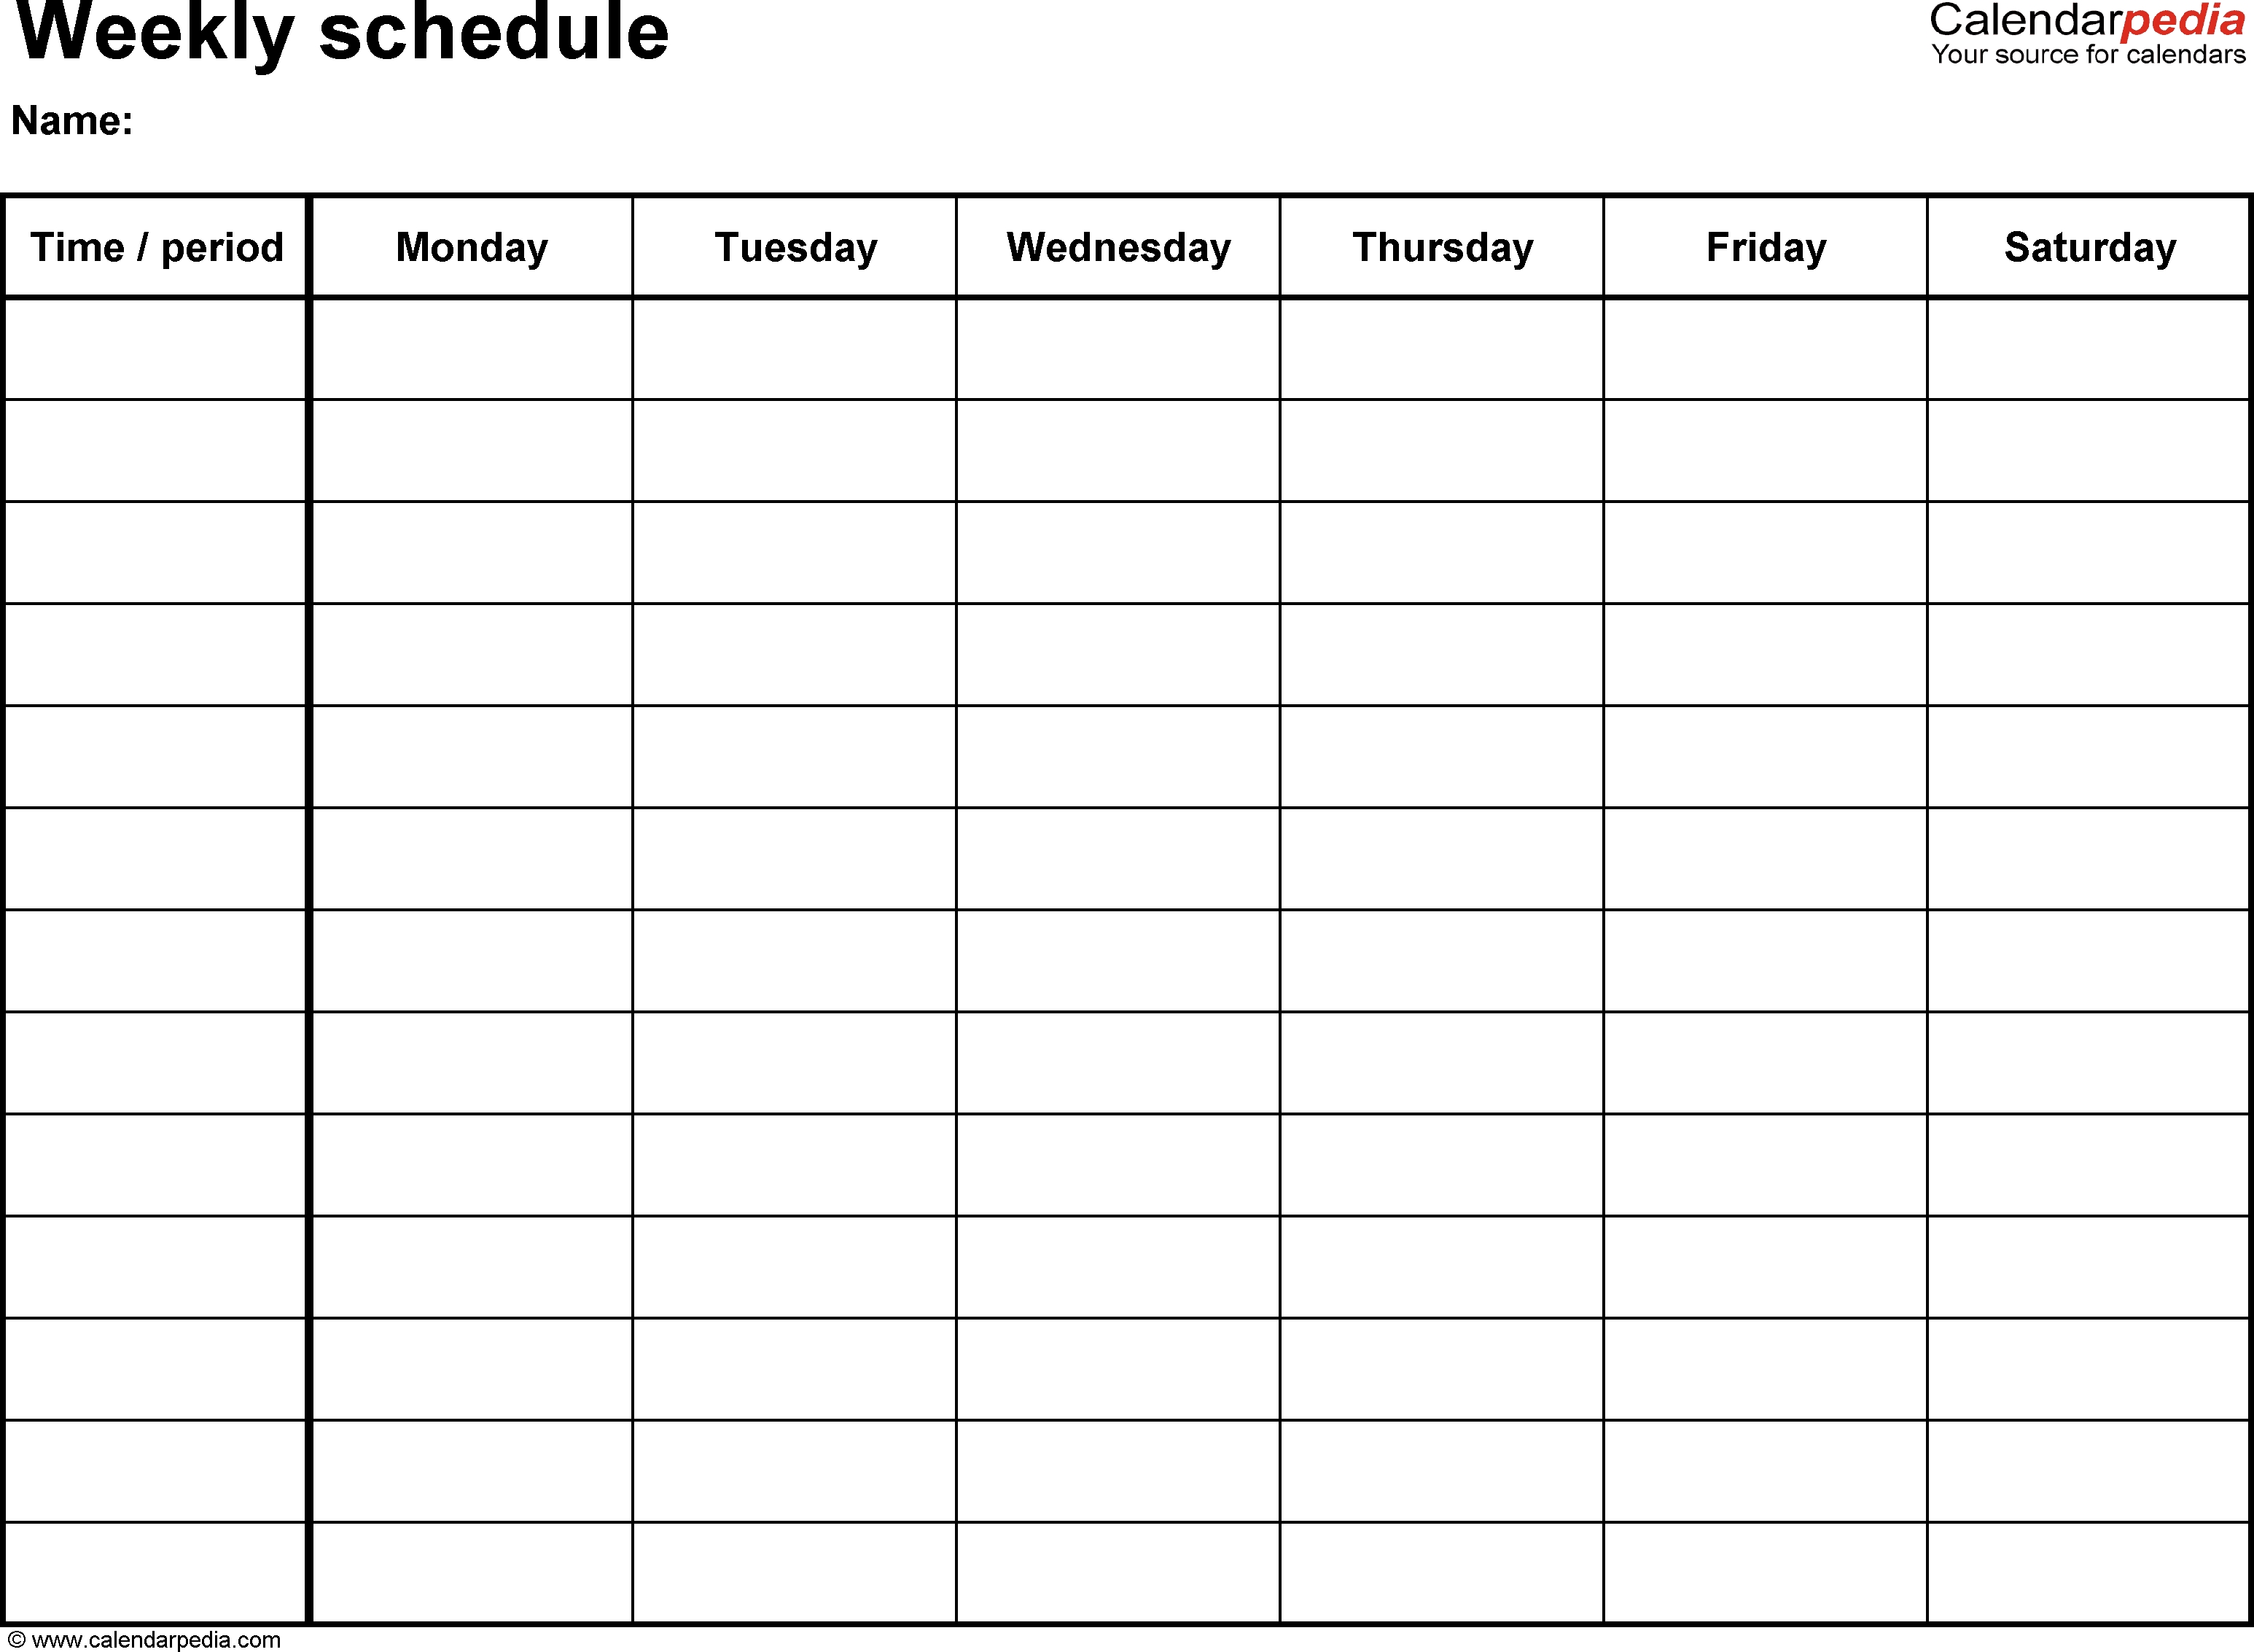 Free Weekly Schedule Templates For Word - 18 Templates intended for Blank Weekly Calendar Monday To Friday